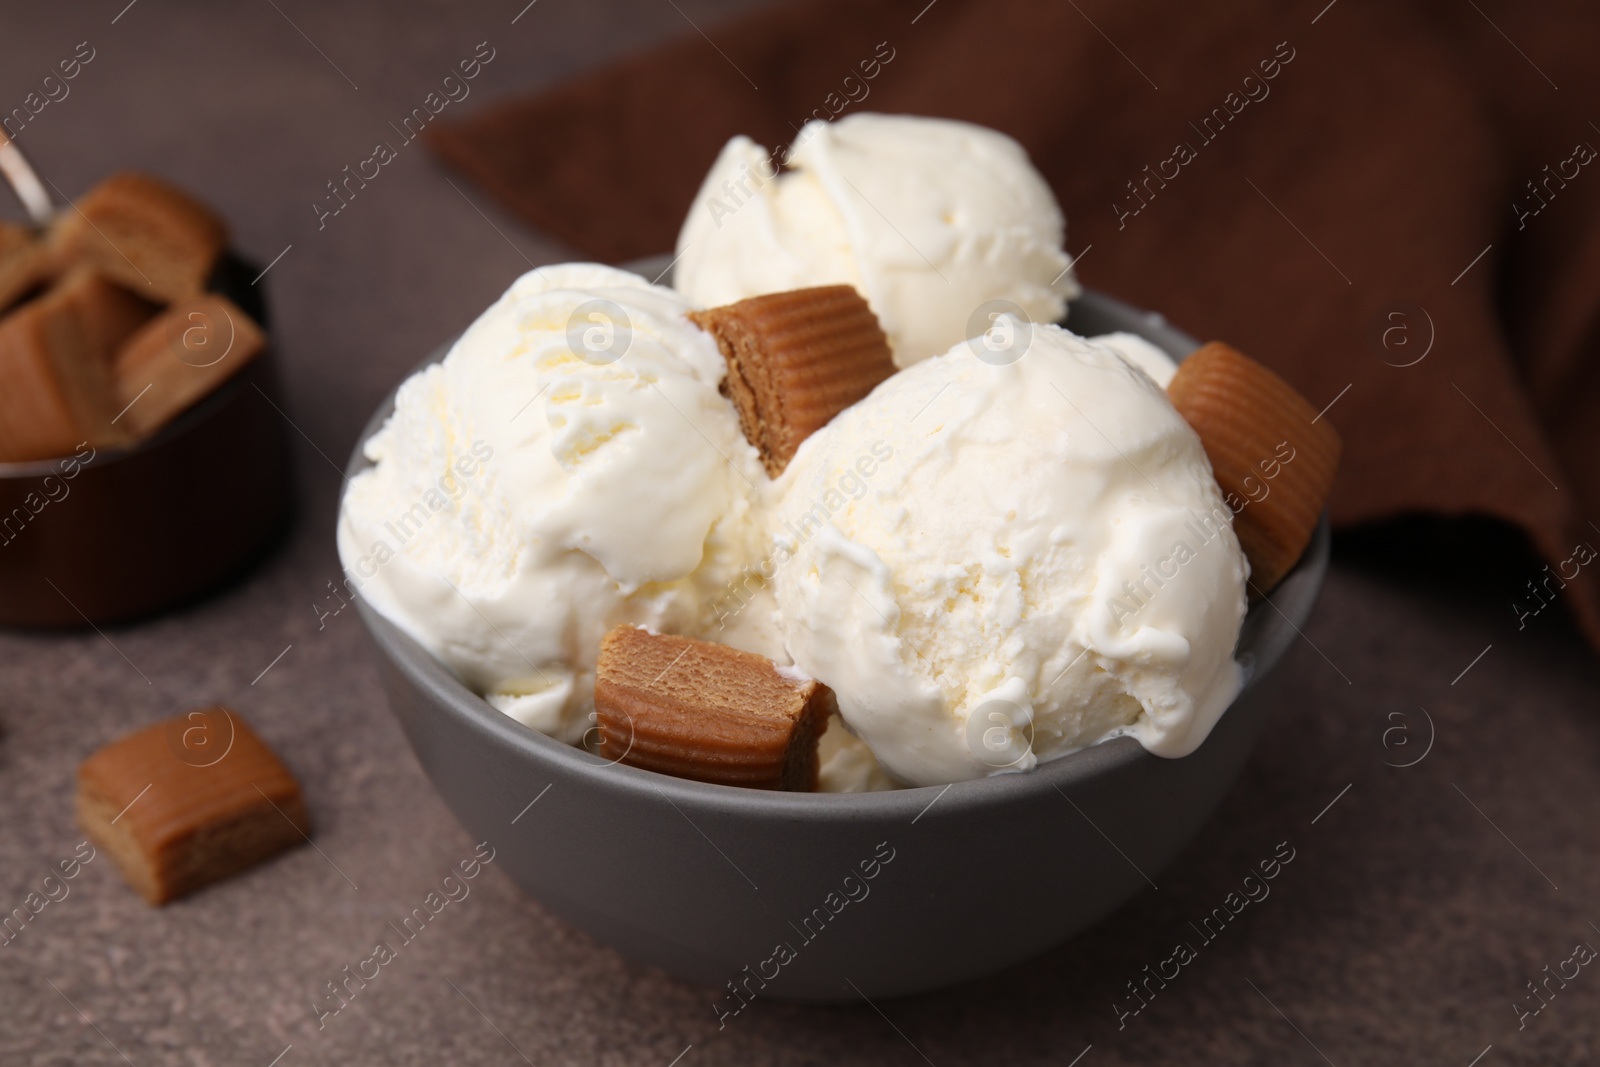 Photo of Scoops of ice cream with caramel candies in bowl on textured table, closeup